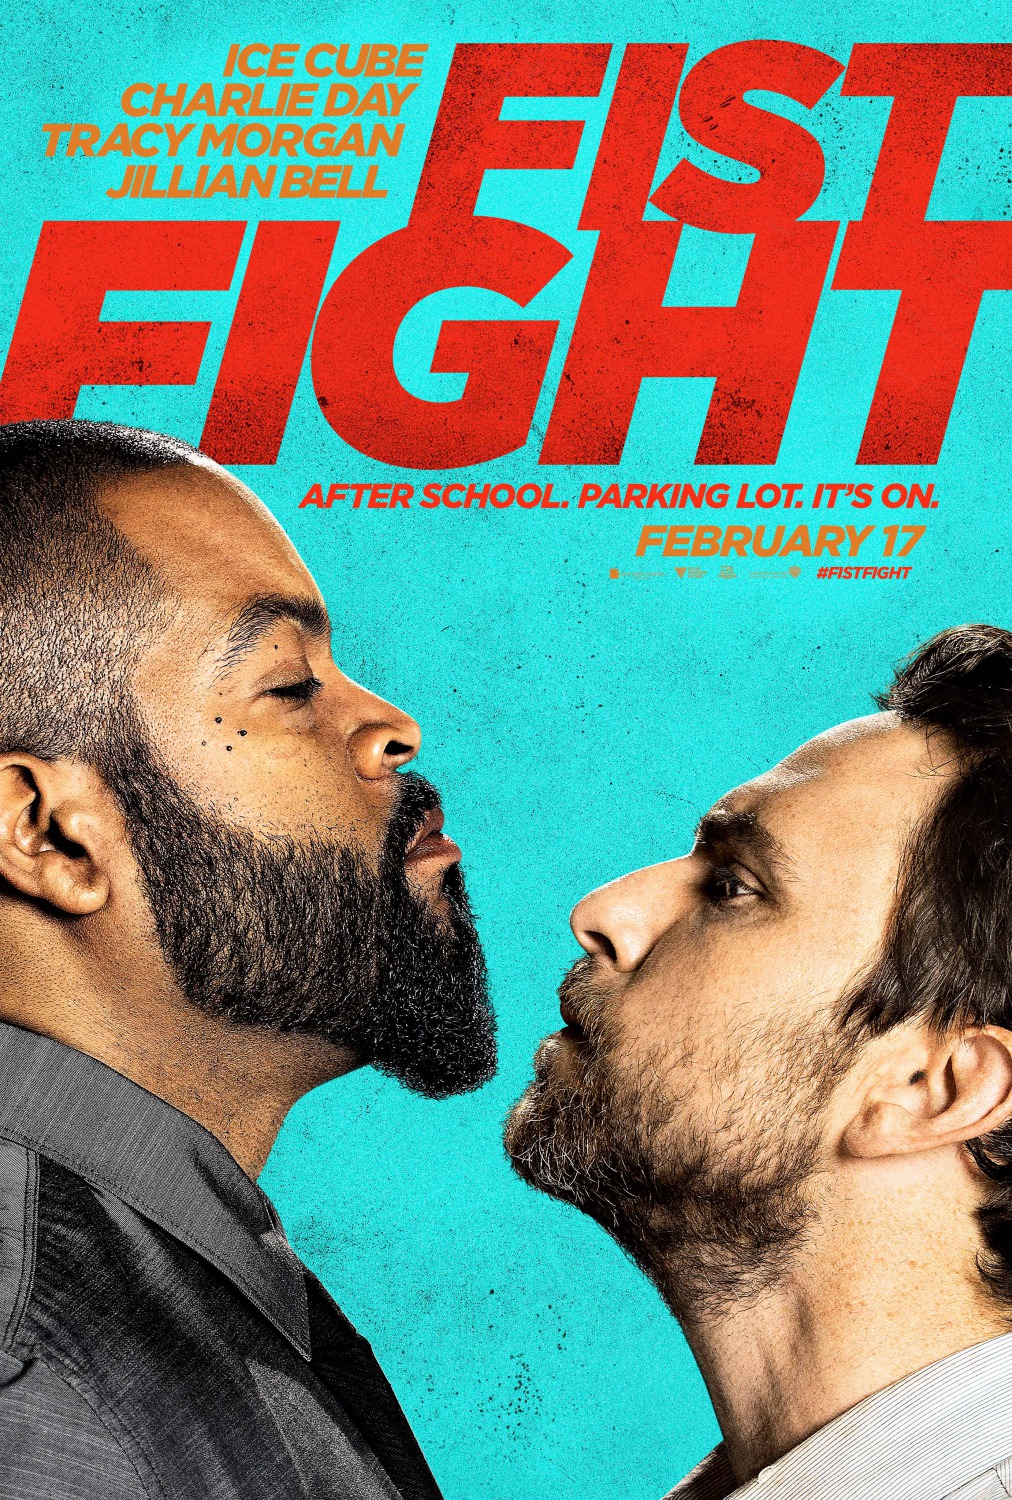 Movie Review: "Fist Fight" (2017) | Lolo Loves Films